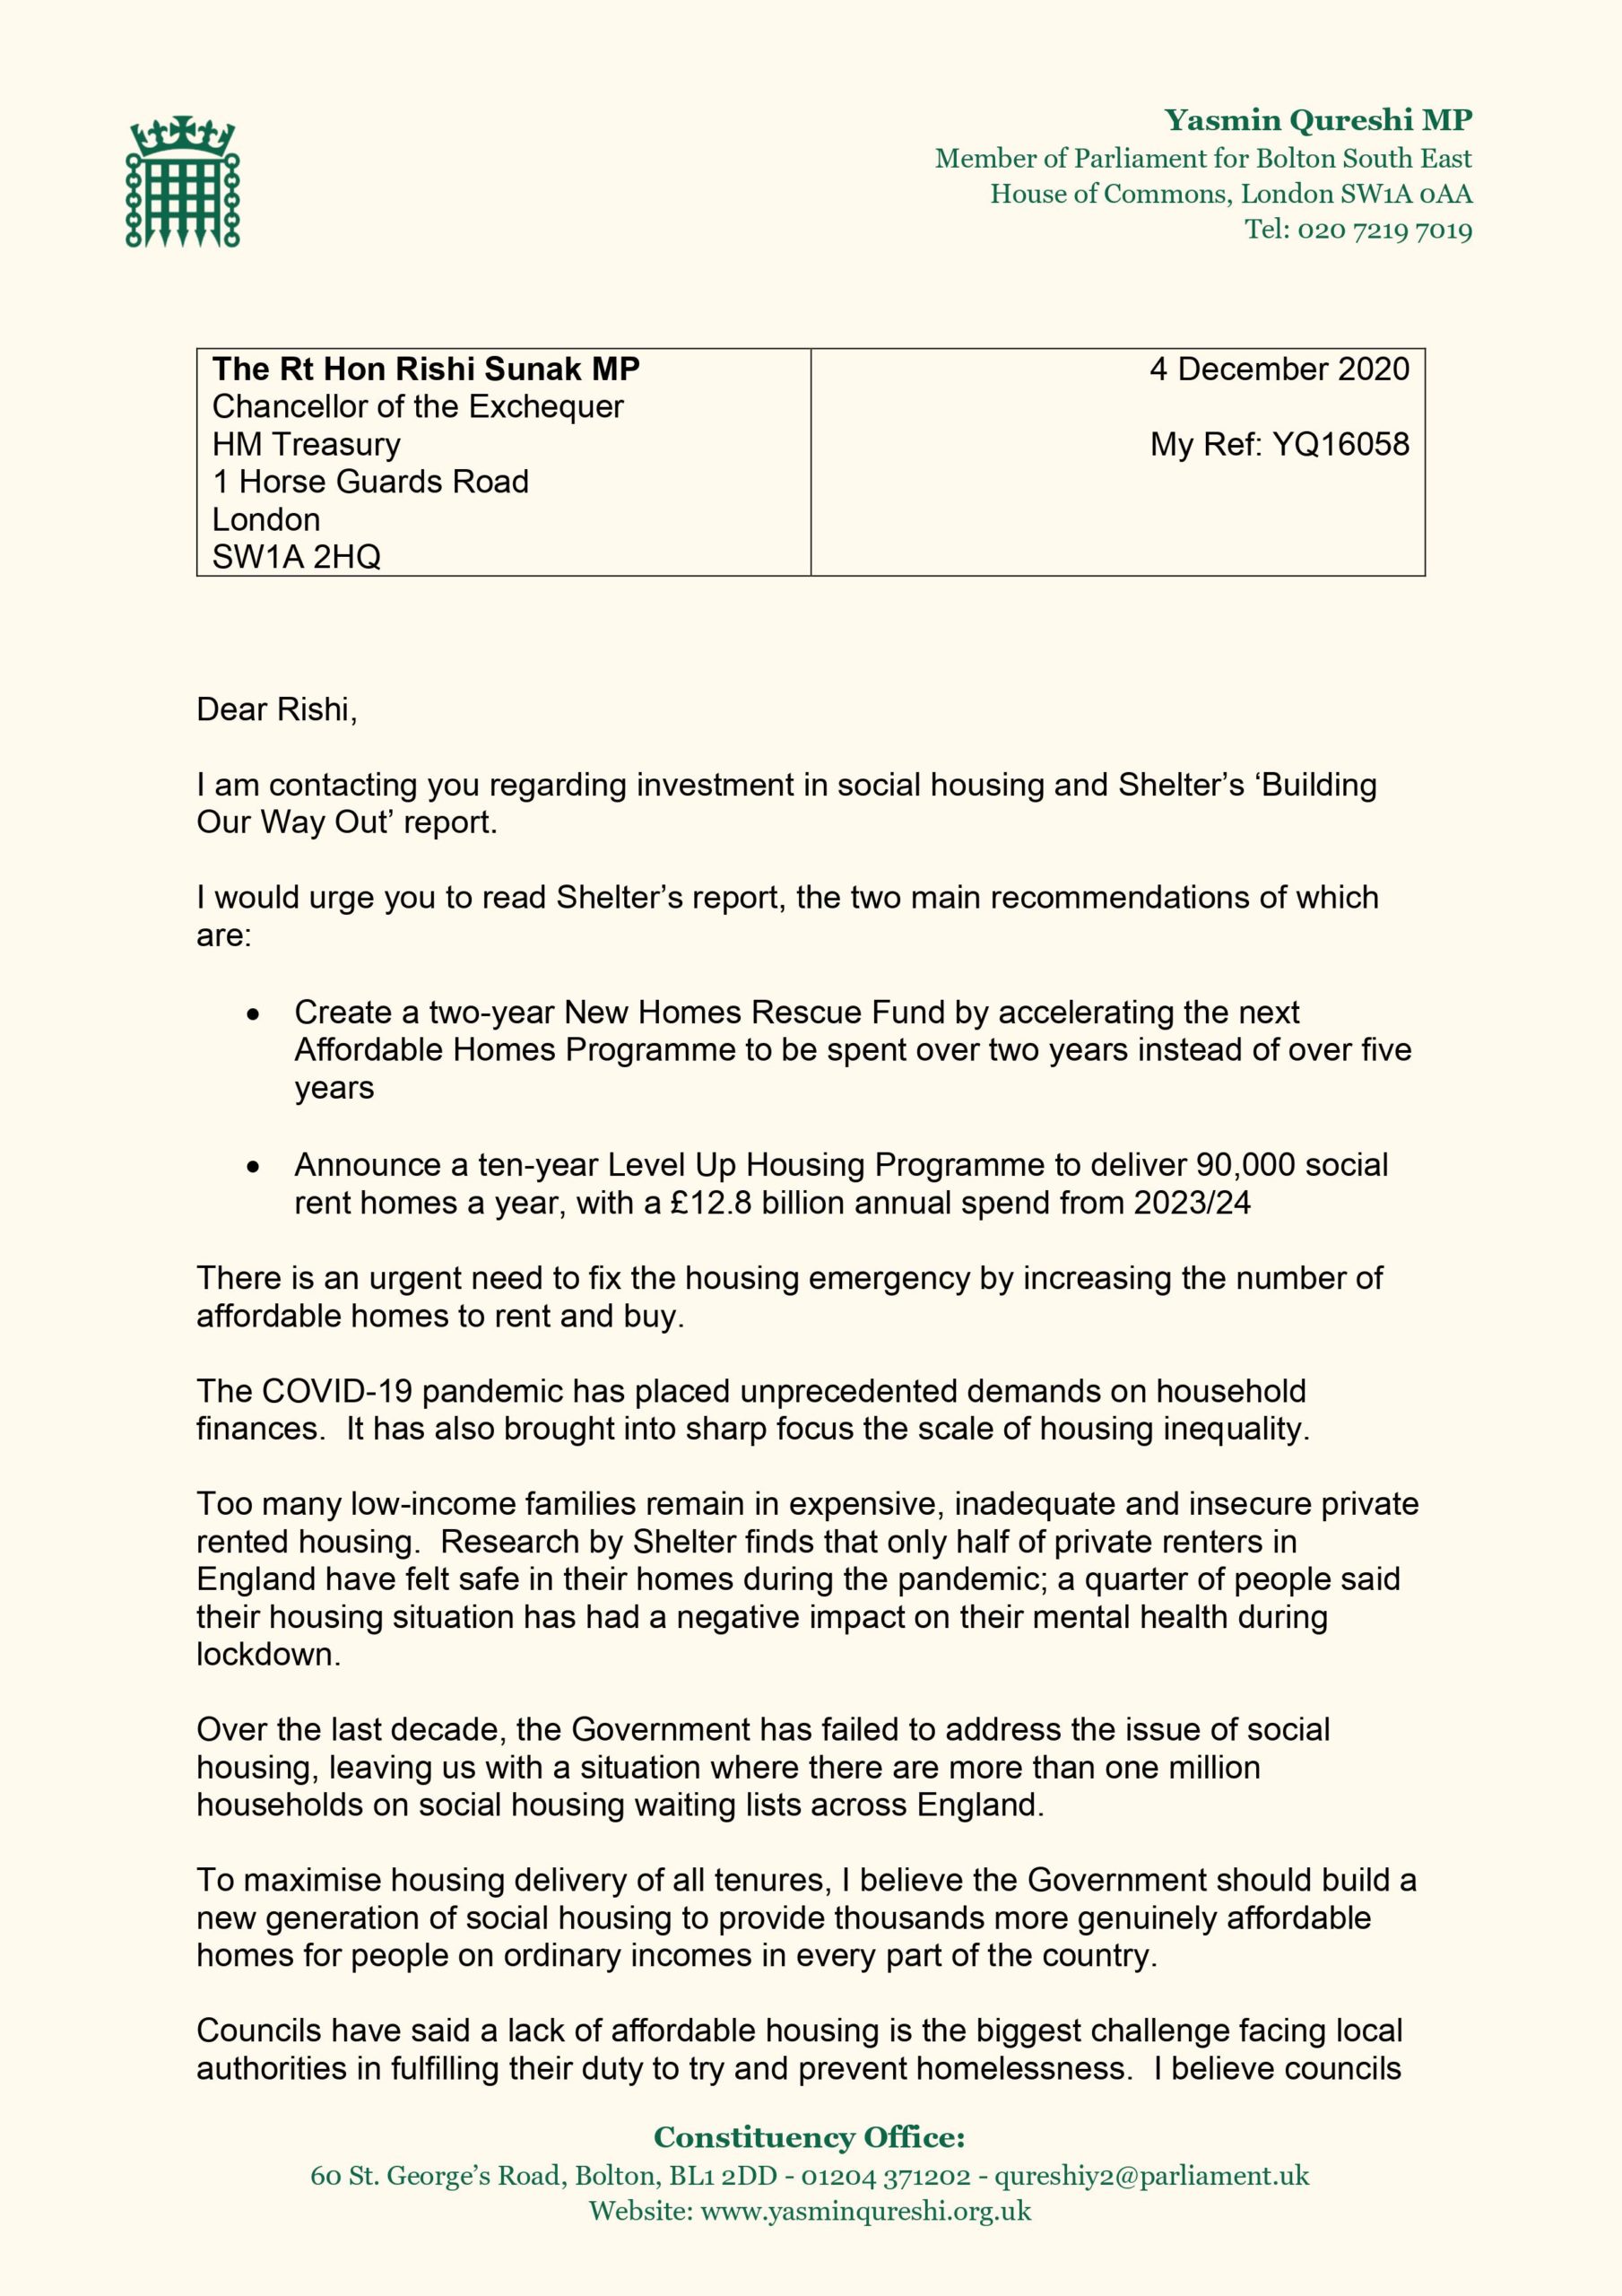 Letter to Chancellor Page 1